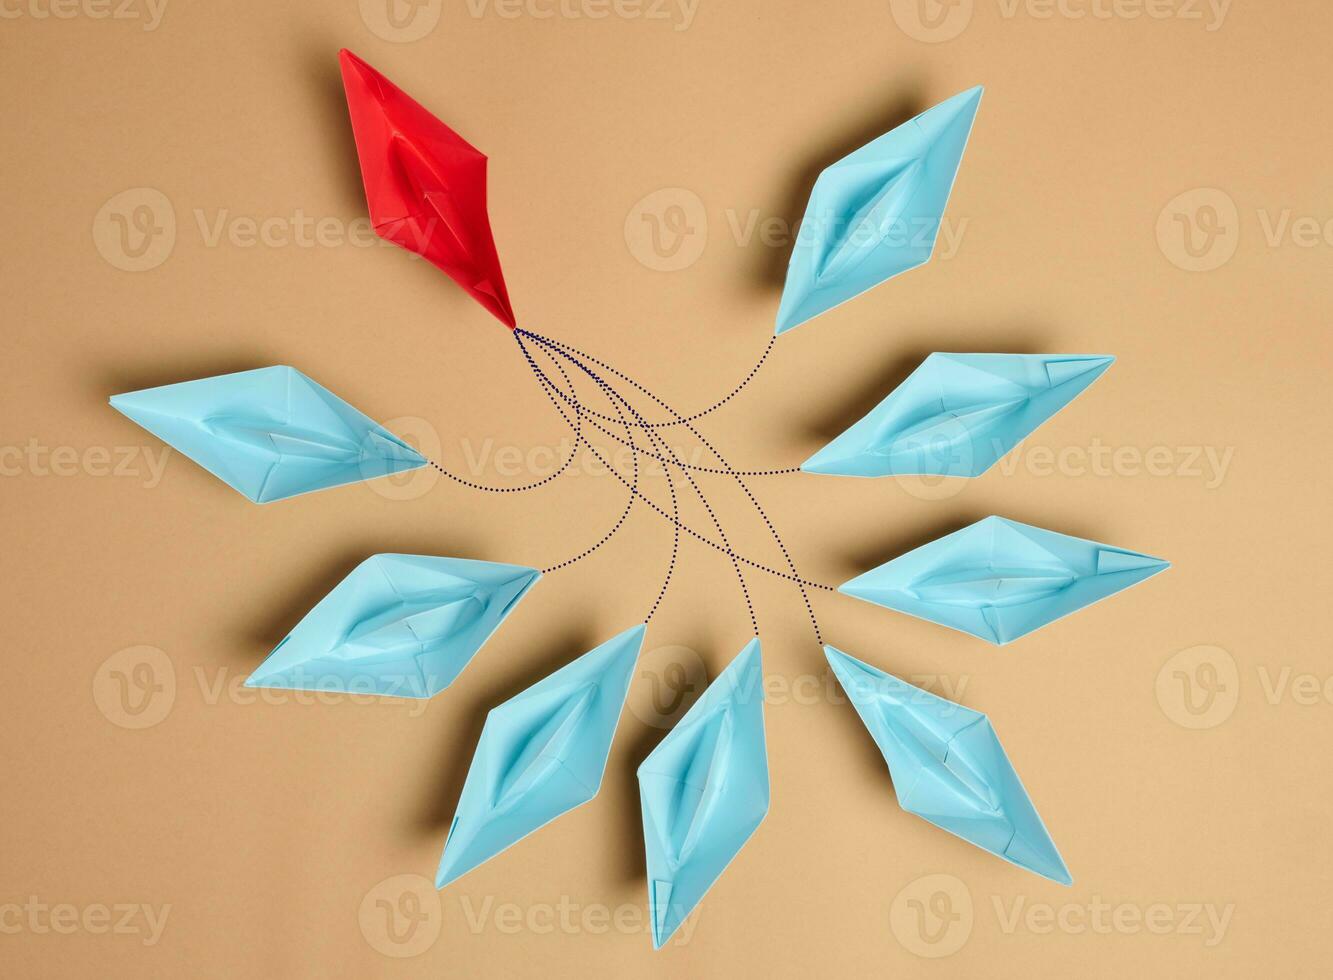 Group of paper boats on a brown background.Concept of a strong leader in a team, manipulation of the masses, following new perspectives photo